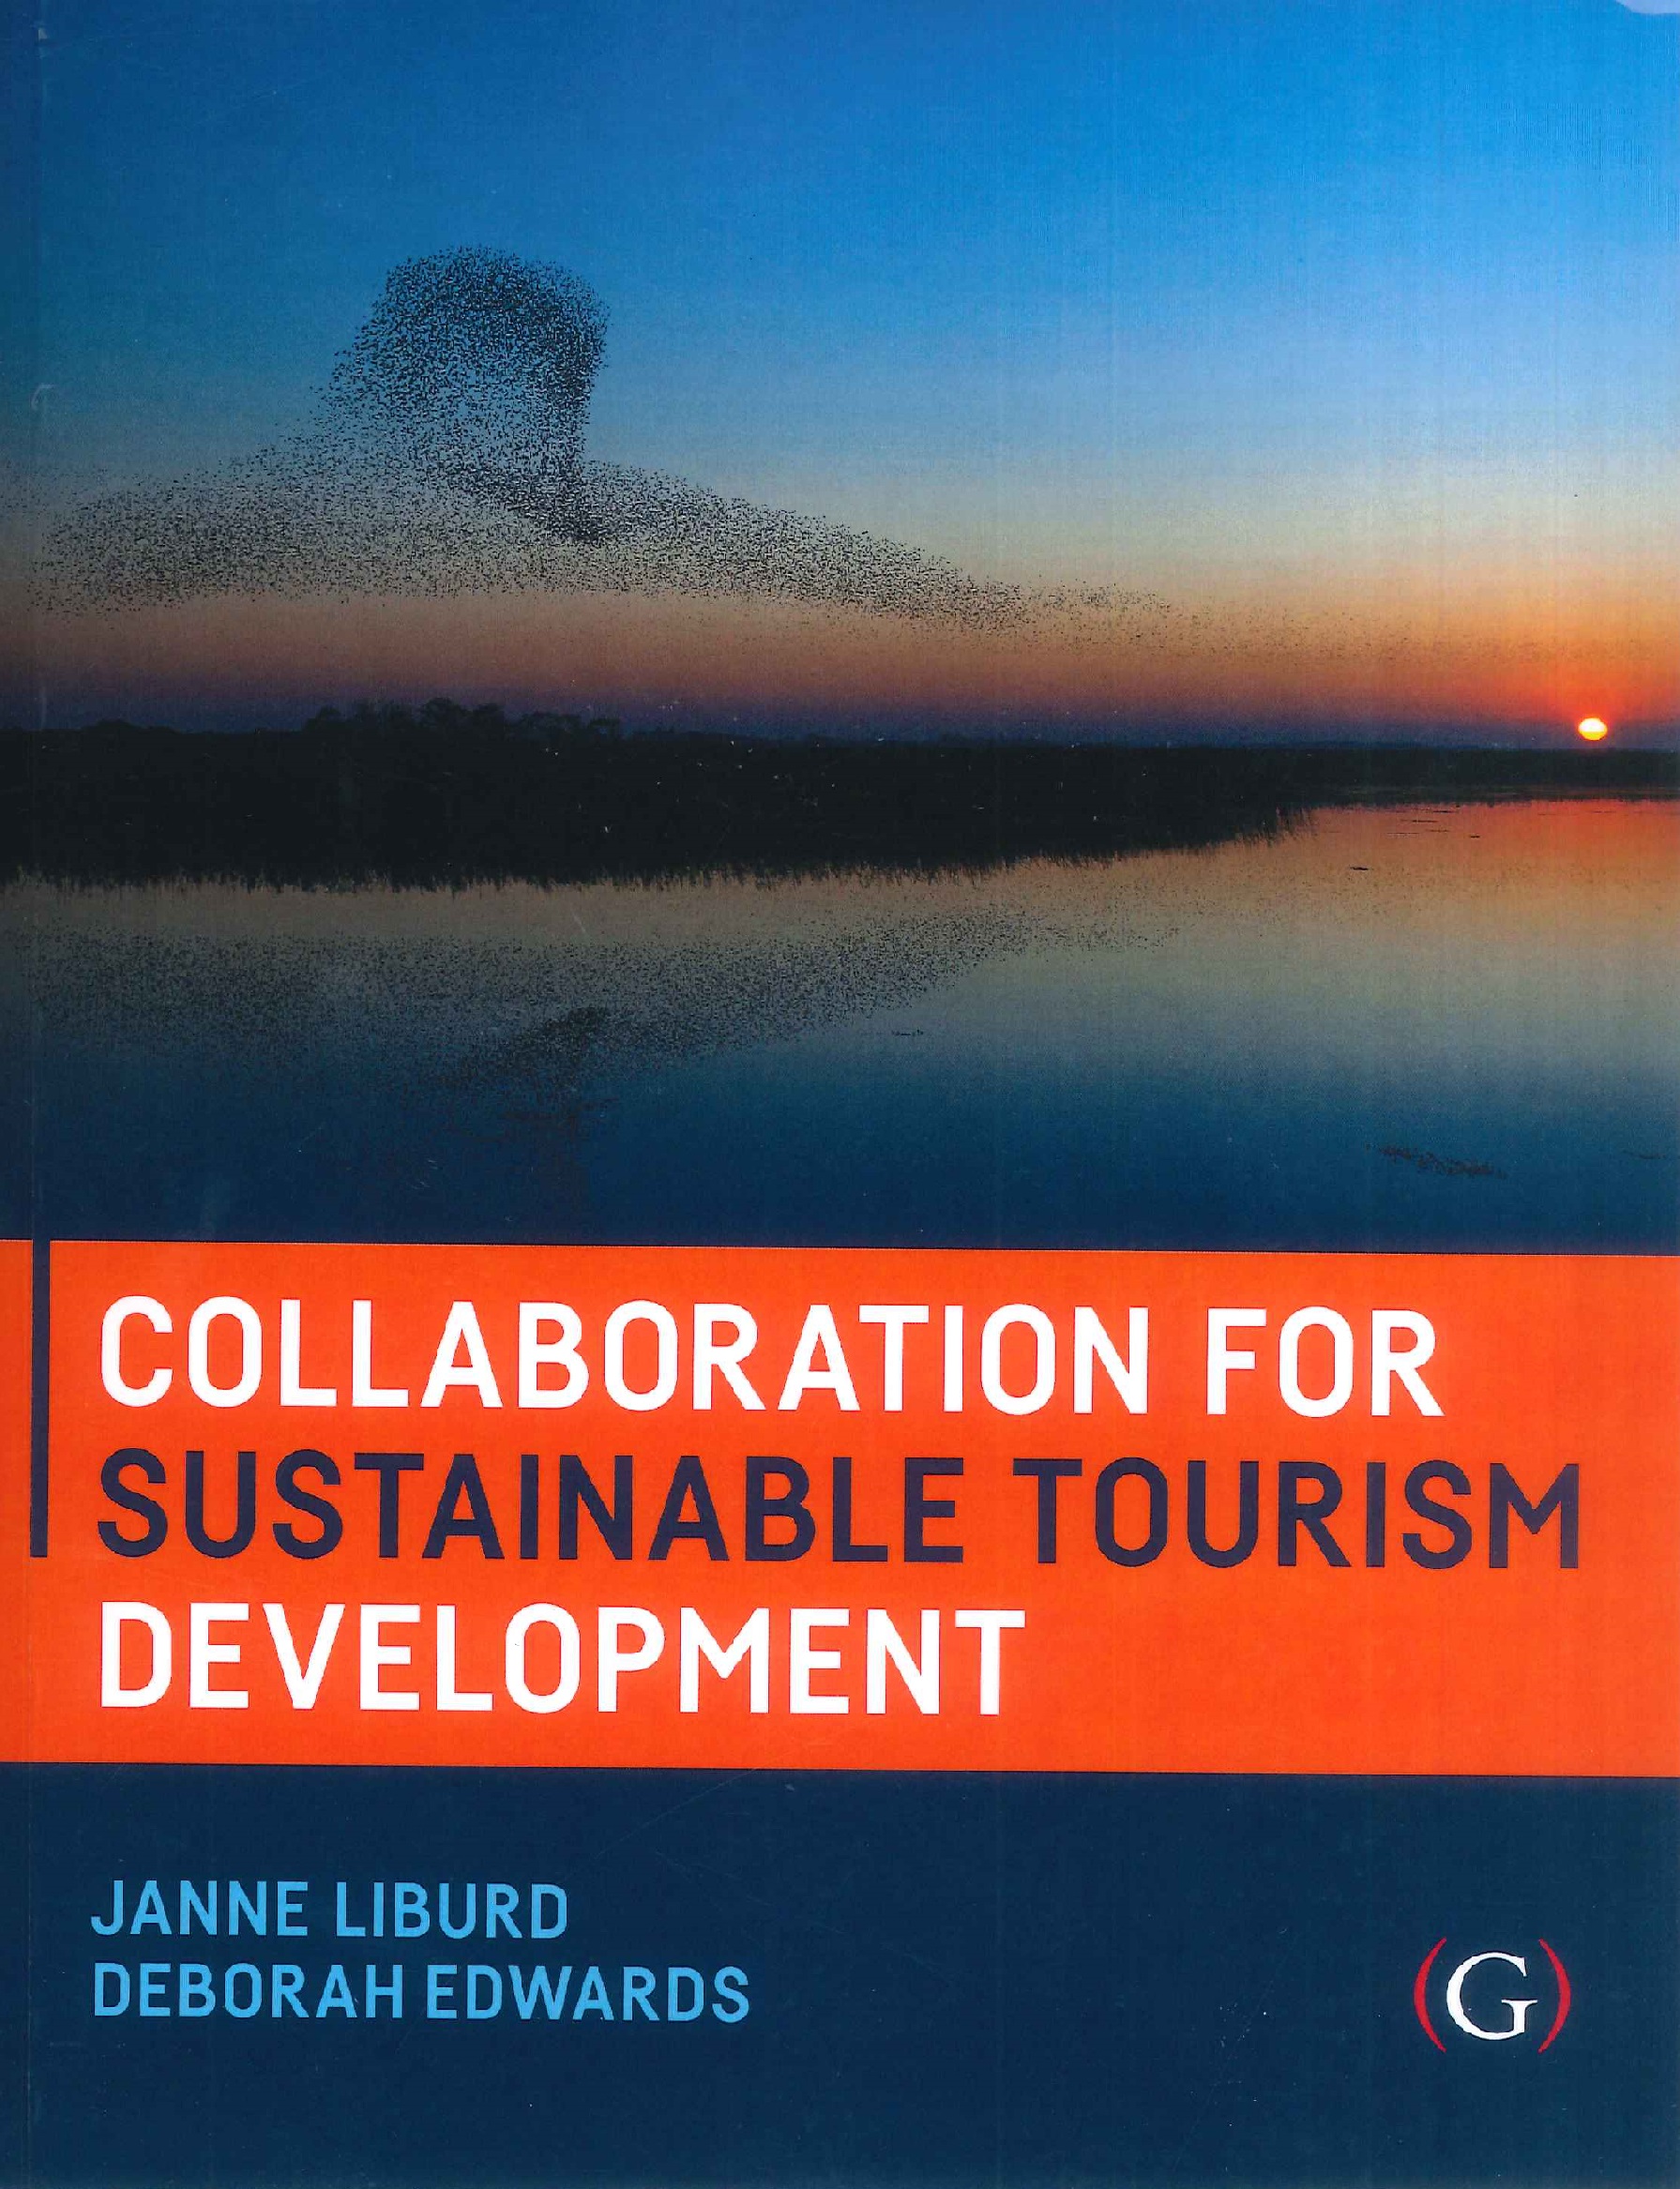 Collaboration for sustainable tourism development